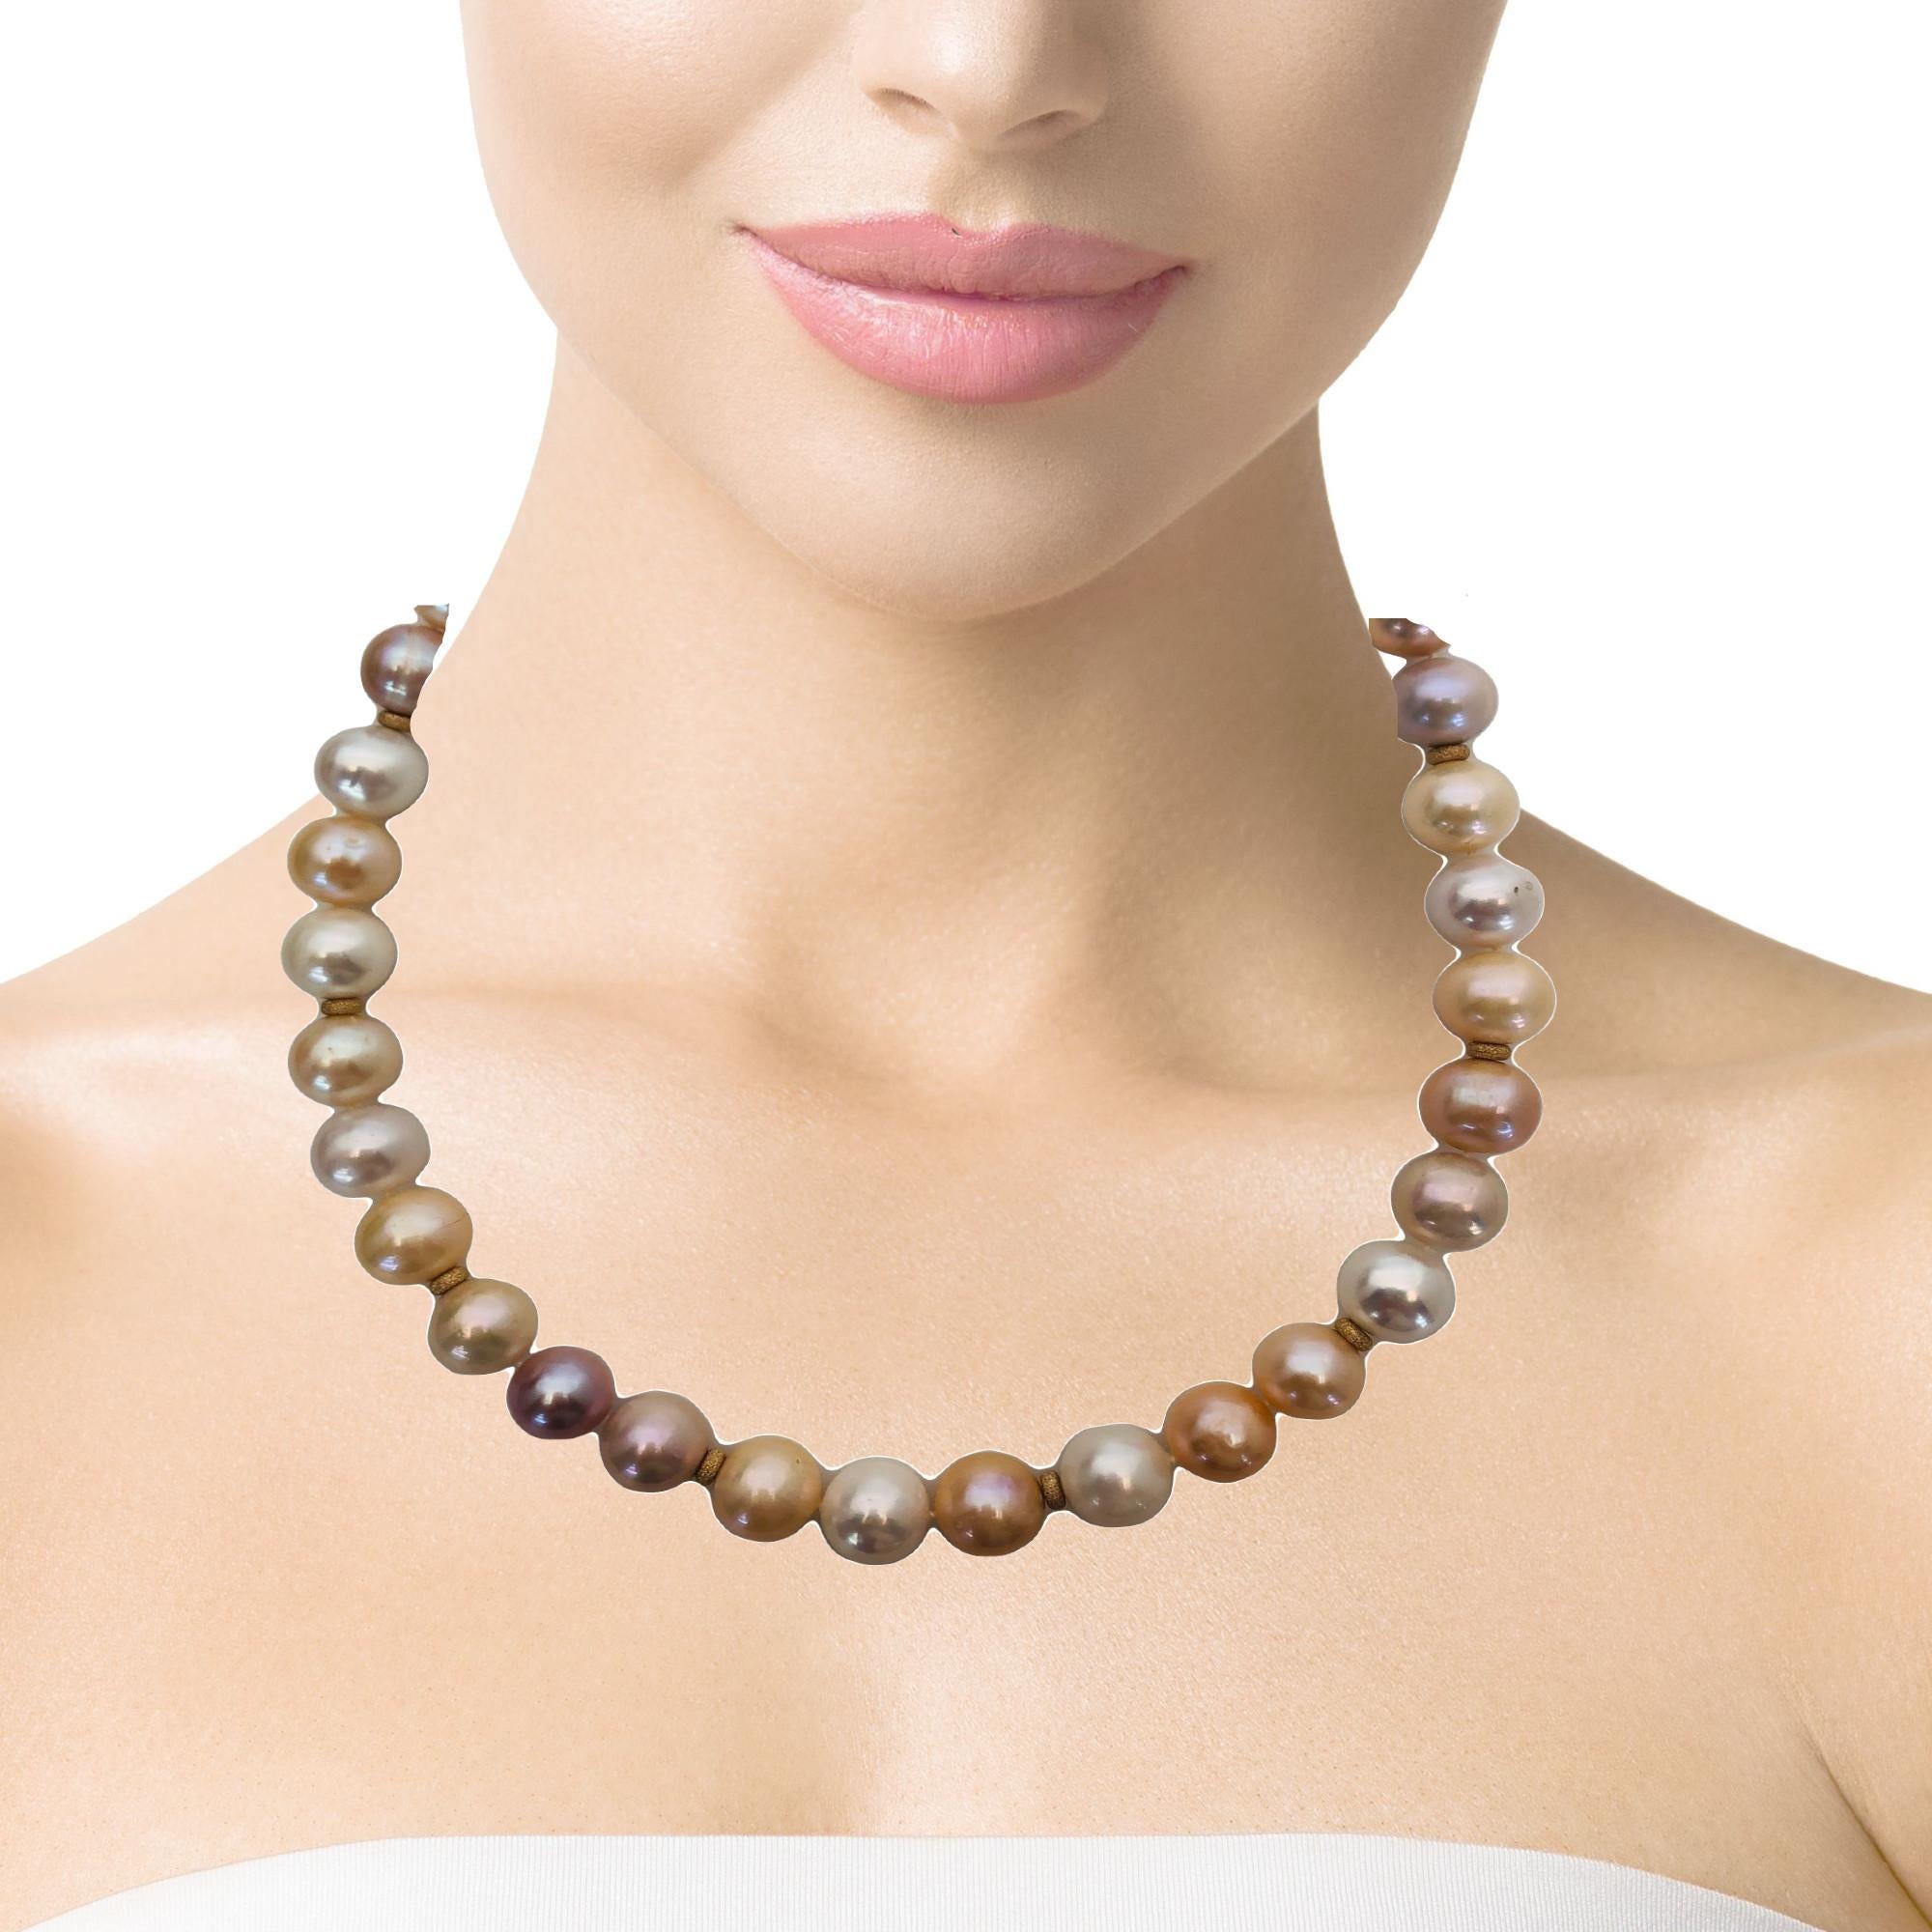 12-13mm Peach Freshwater Pearl Necklace with 14k Yellow Gold Accents For Sale 3